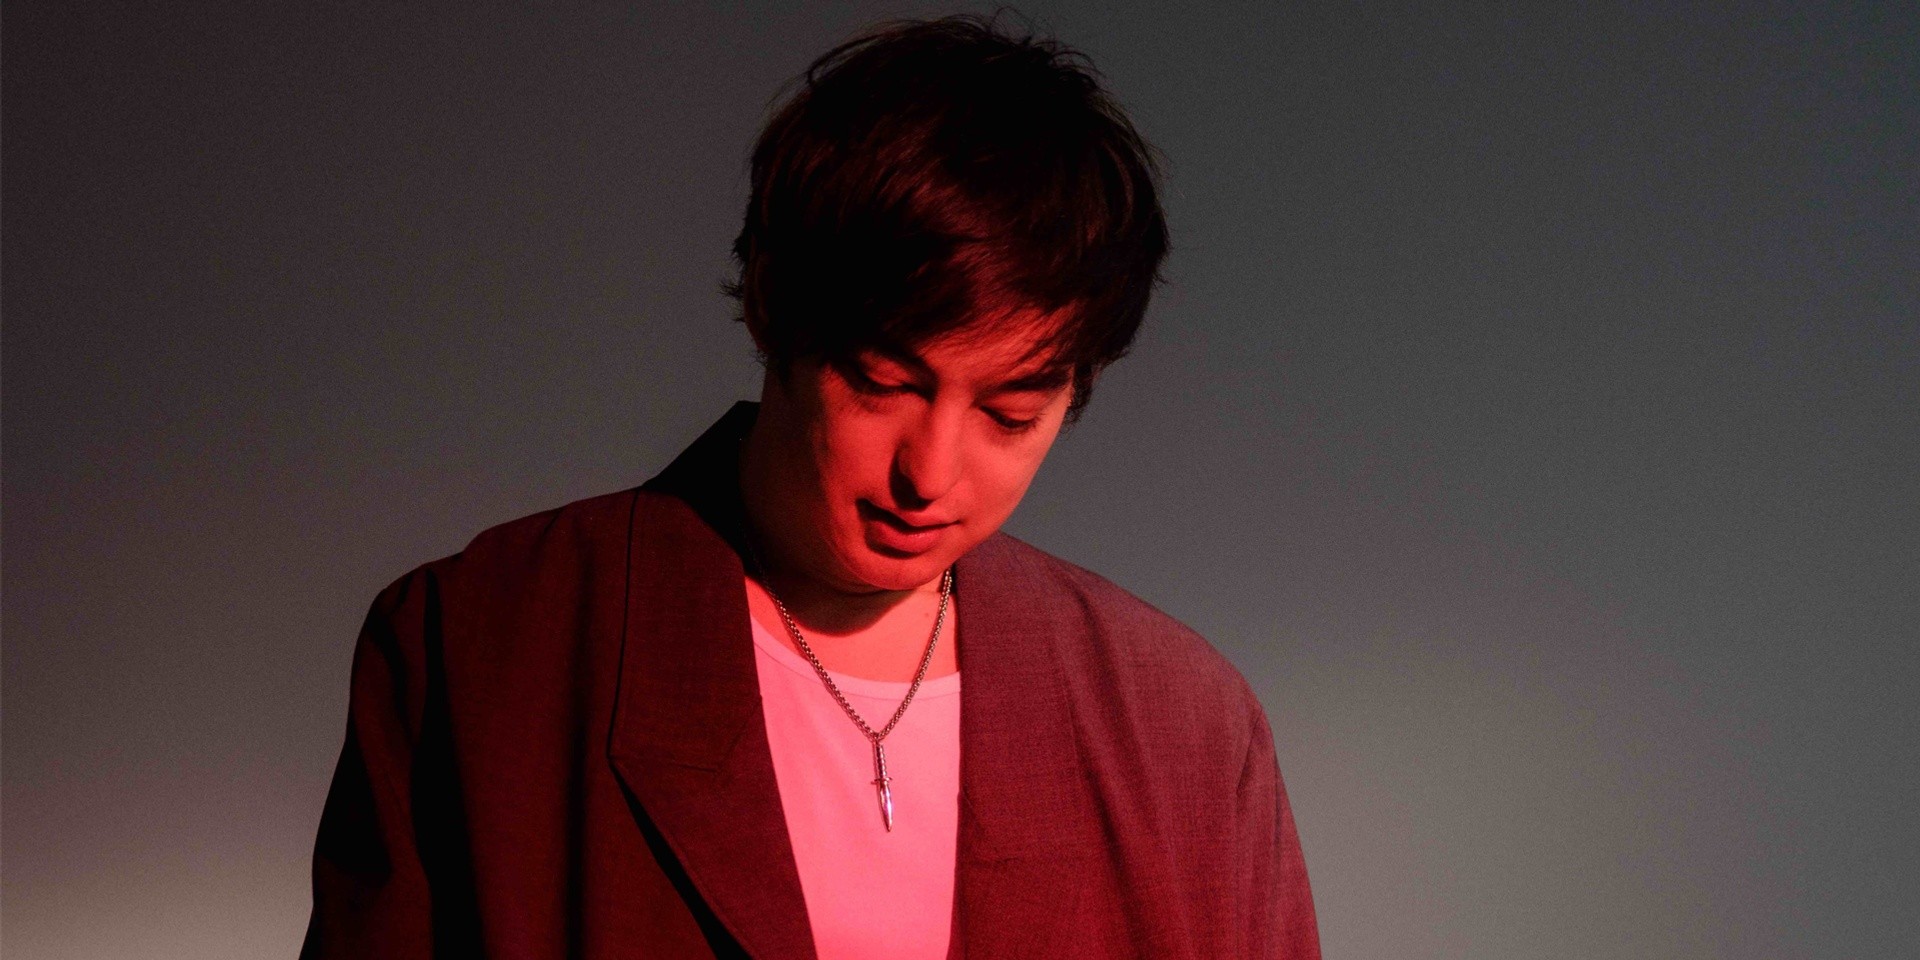 Joji to hold first online concert The Extravaganza with never-before-seen hijinks and more